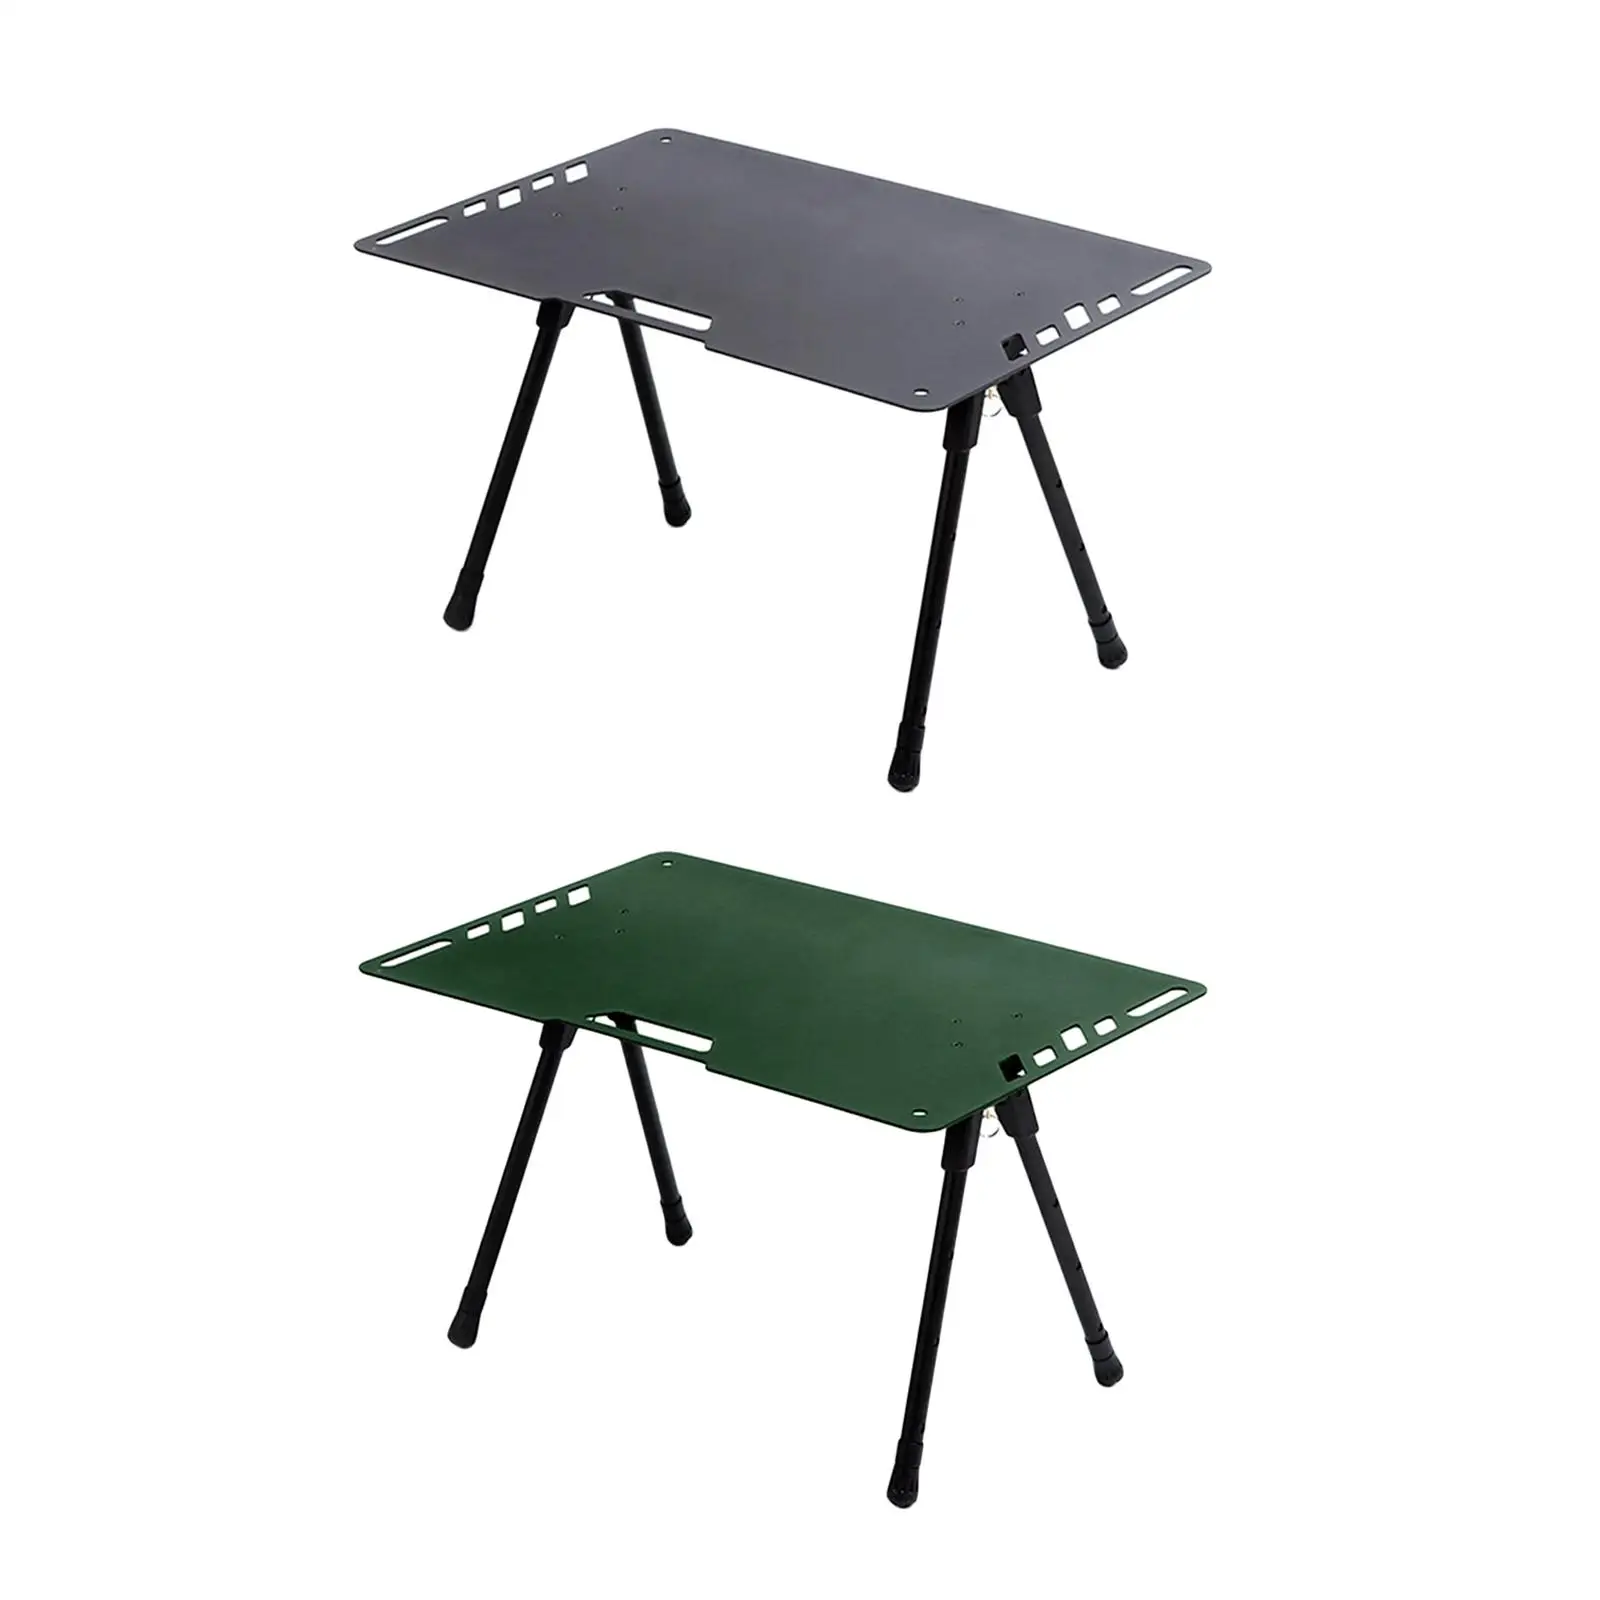 Camping Folding Tables Camp Table Portable Beach Tables Side Table Coffee Table for Cooking Patio Hiking Lantern Lamp Holder